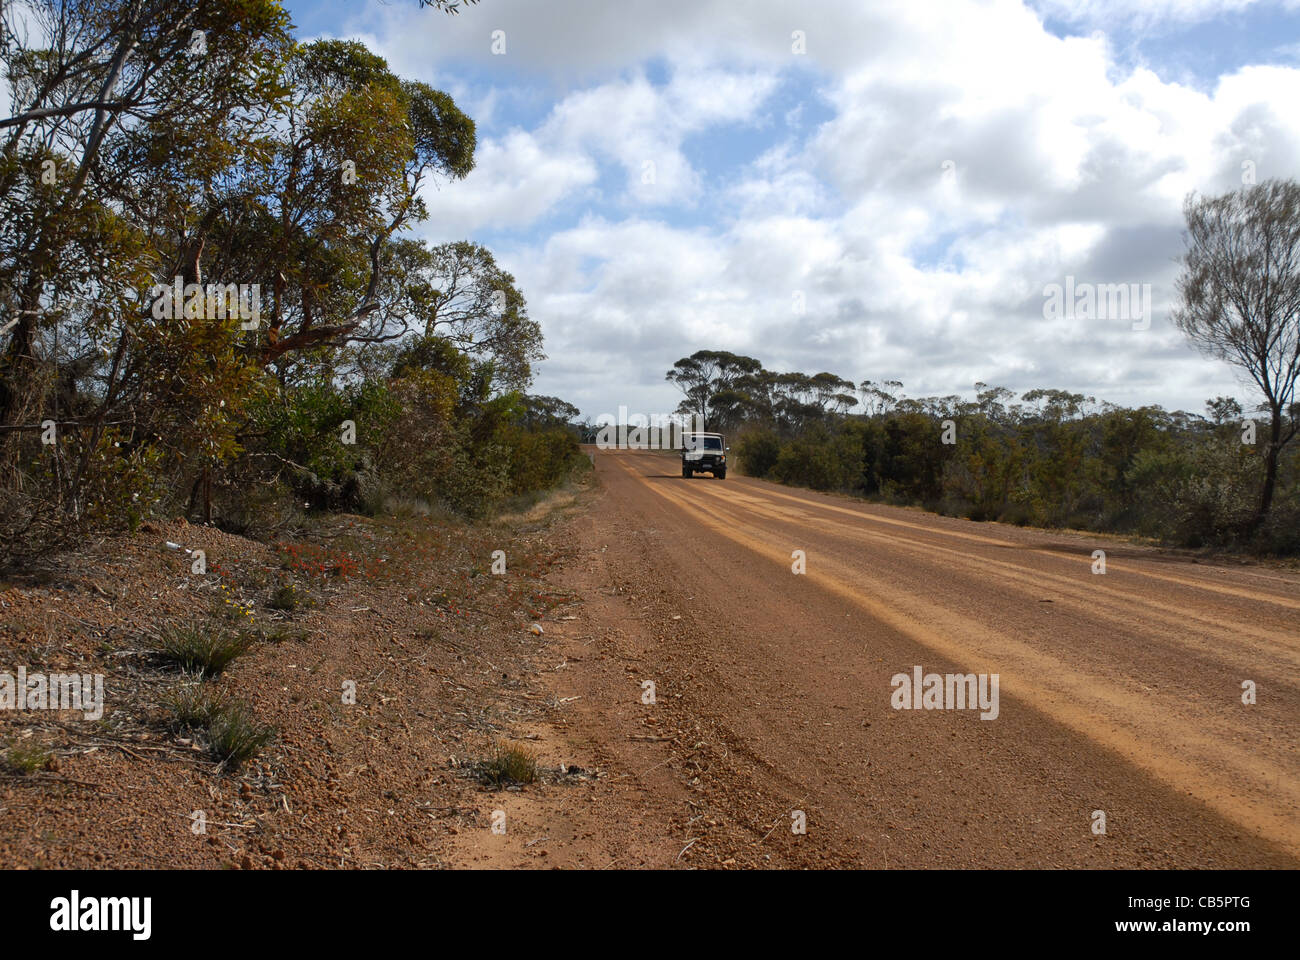 4WD vehicle on red dirt track, outback Western Australia, Australia Stock Photo